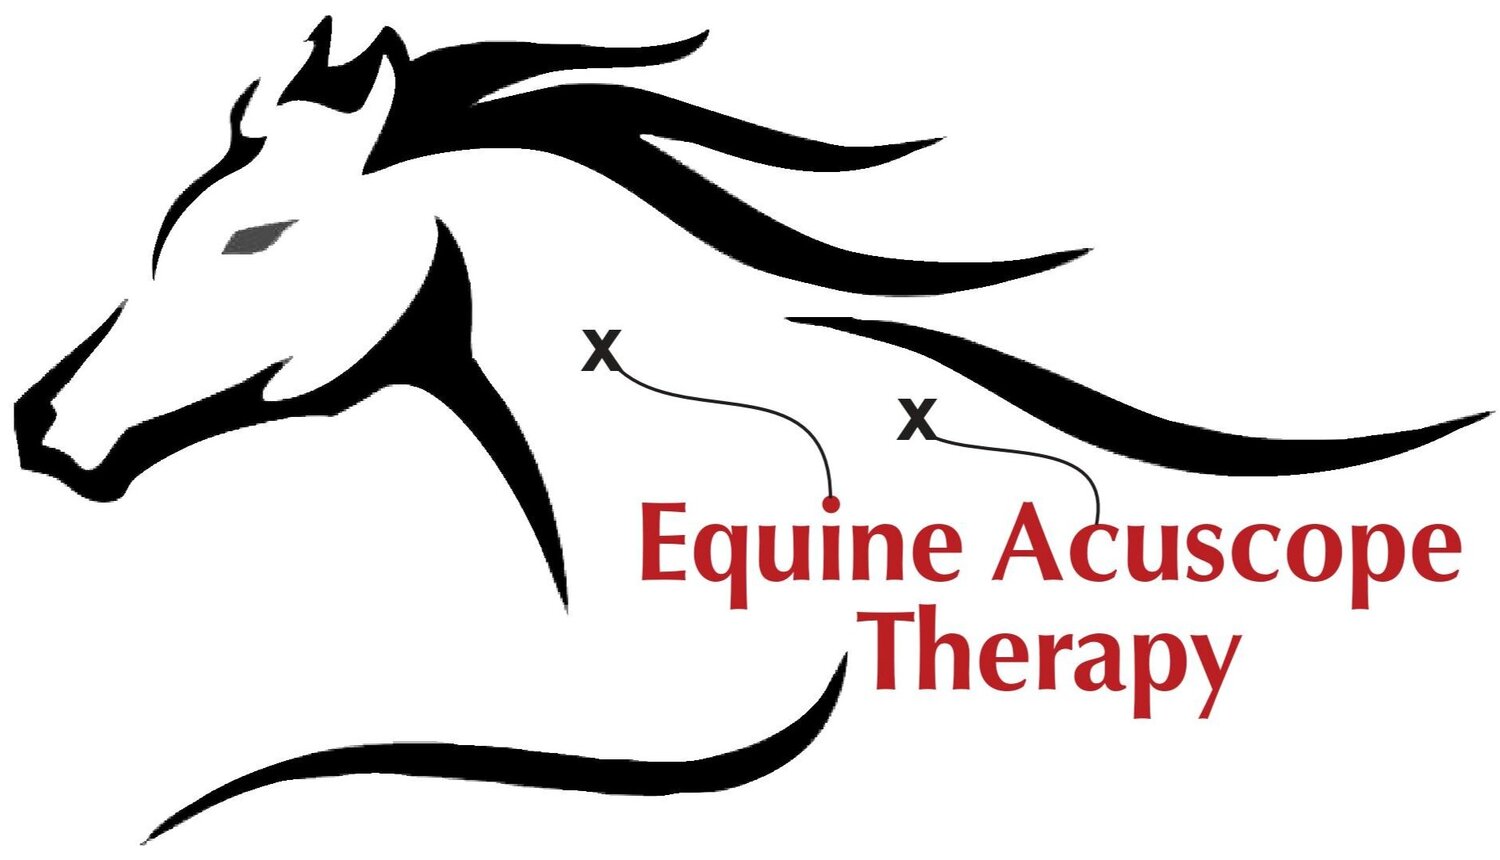 Equine Acuscope Therapy 